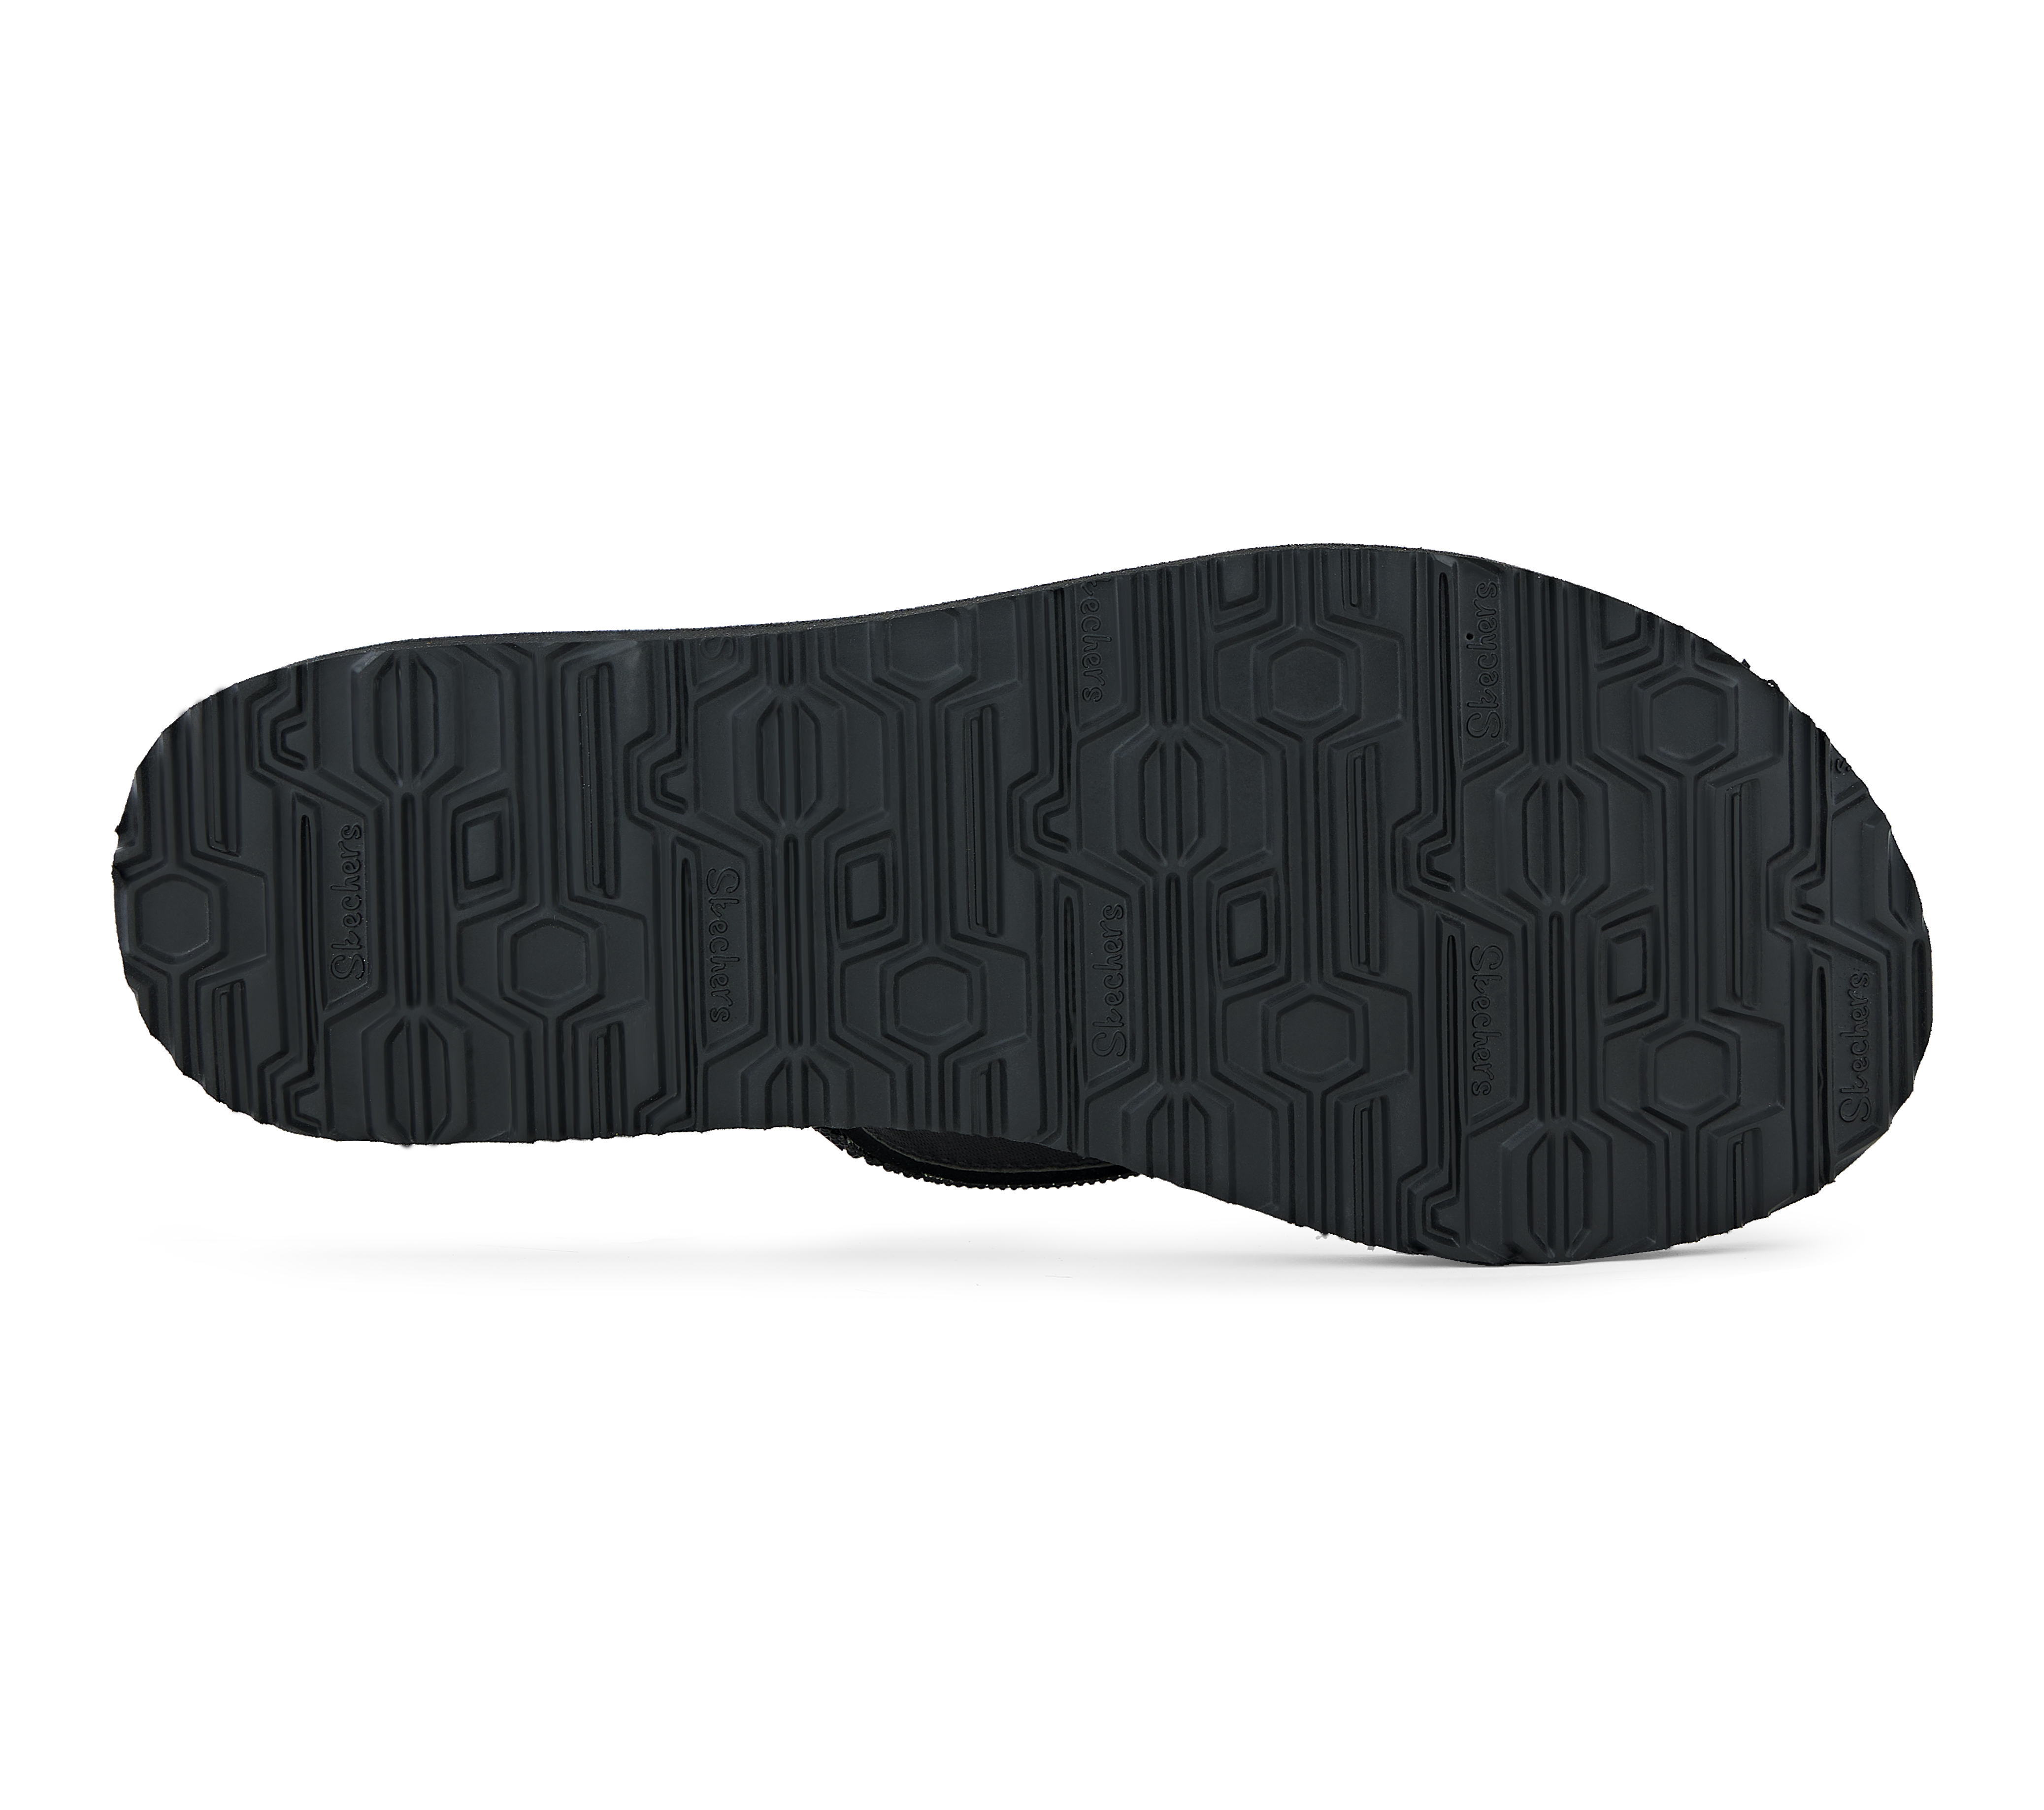 MEDITATION - X'S AND O'S, BBLACK Footwear Bottom View